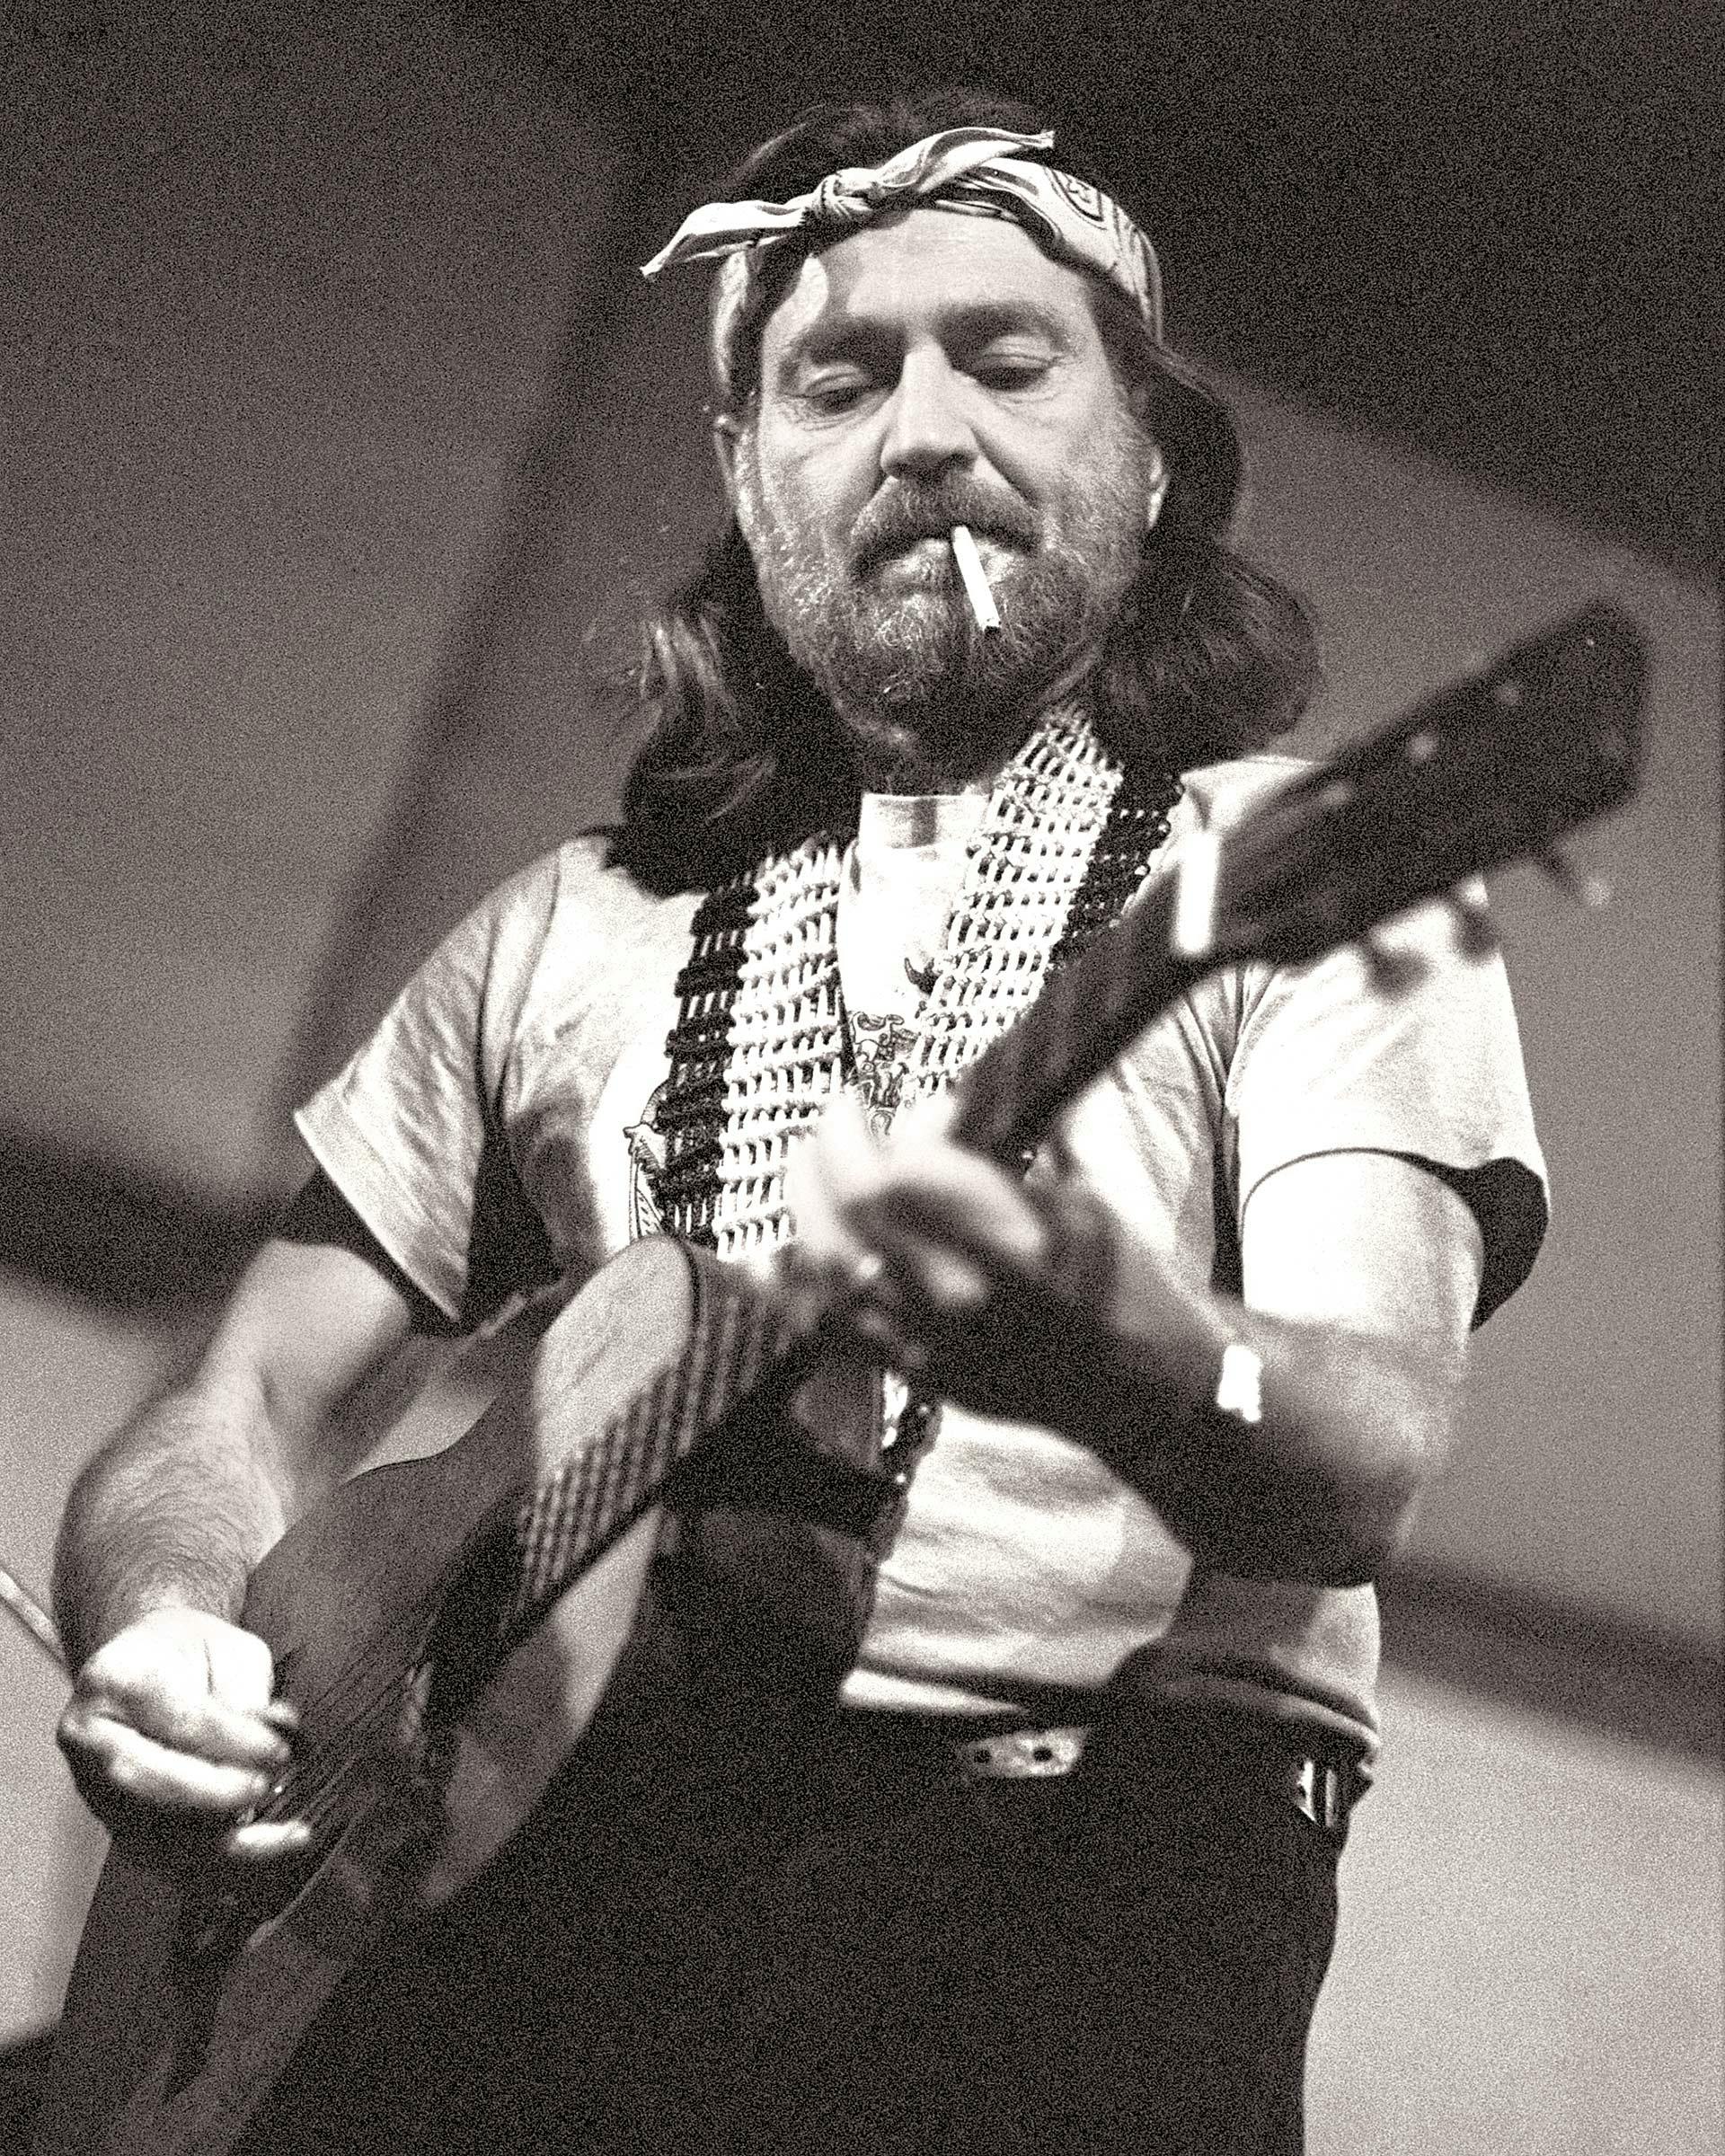 Willie Nelson smoking a cigarette while he strums his guitar. 